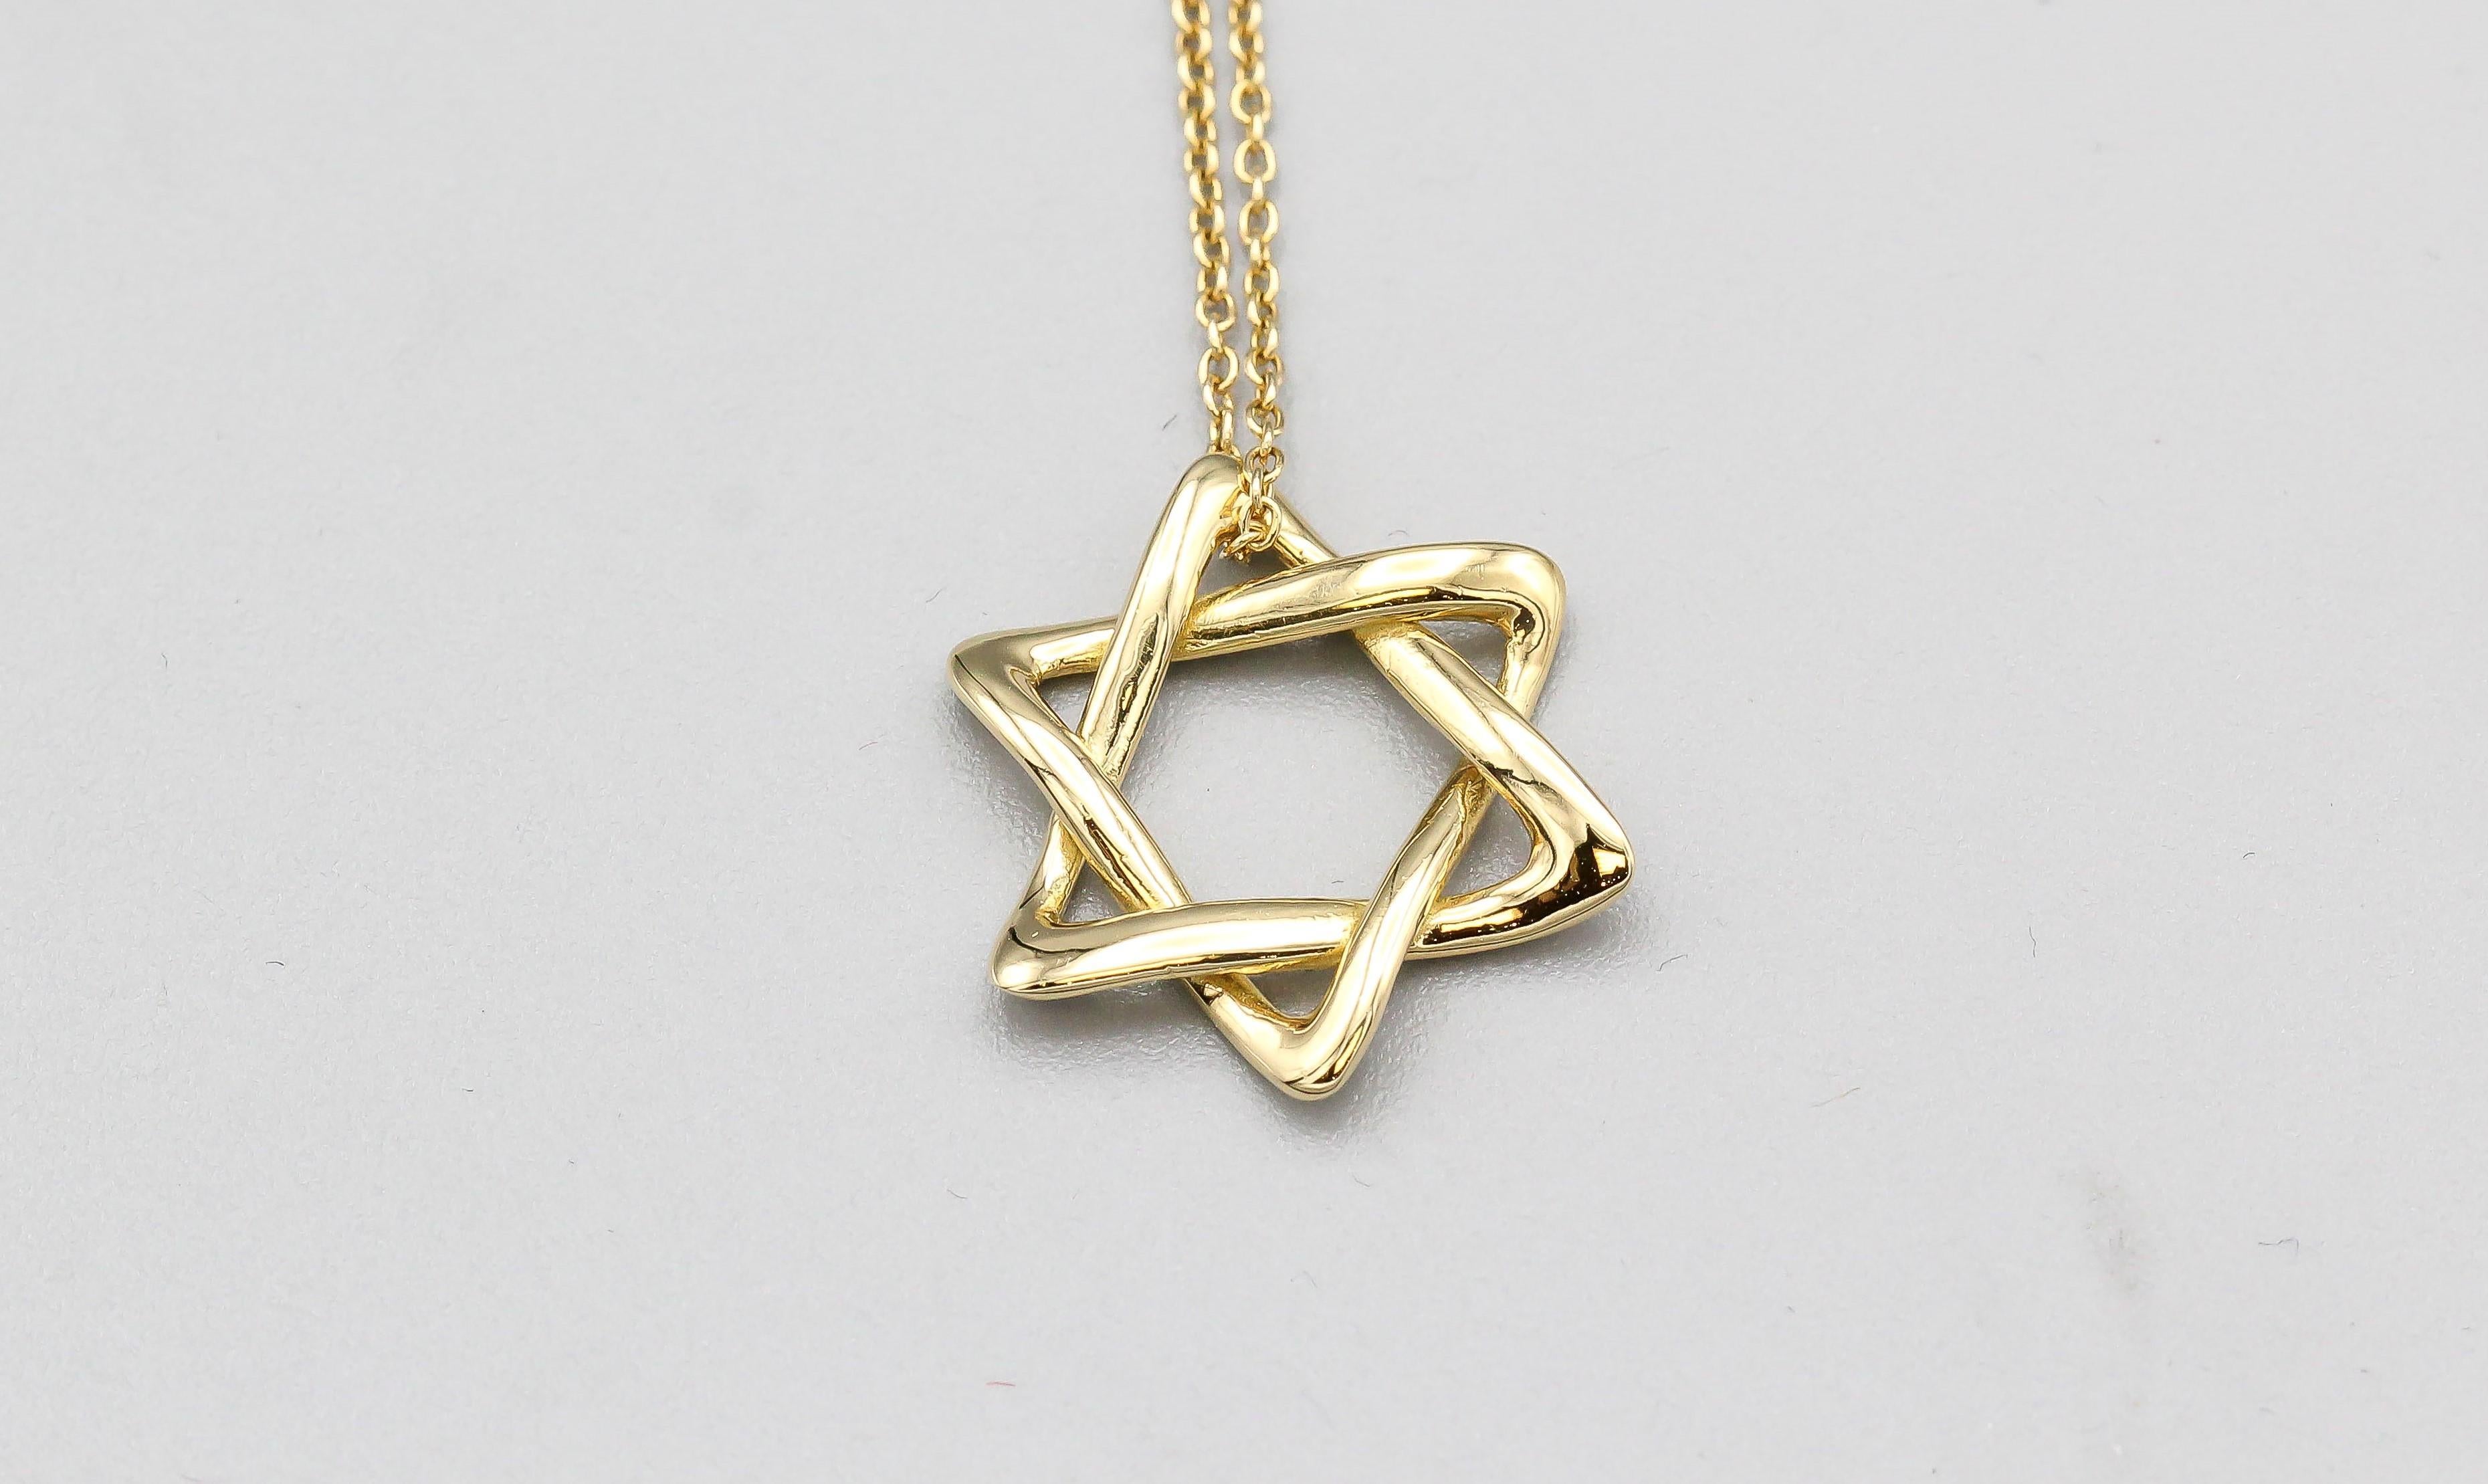 Introducing the Tiffany & Co. Elsa Peretti Star of David Large 18k Yellow Gold Pendant Necklace, a magnificent symbol of faith, artistry, and luxury. This exquisite piece of jewelry is a true masterpiece that captures the essence of timeless design